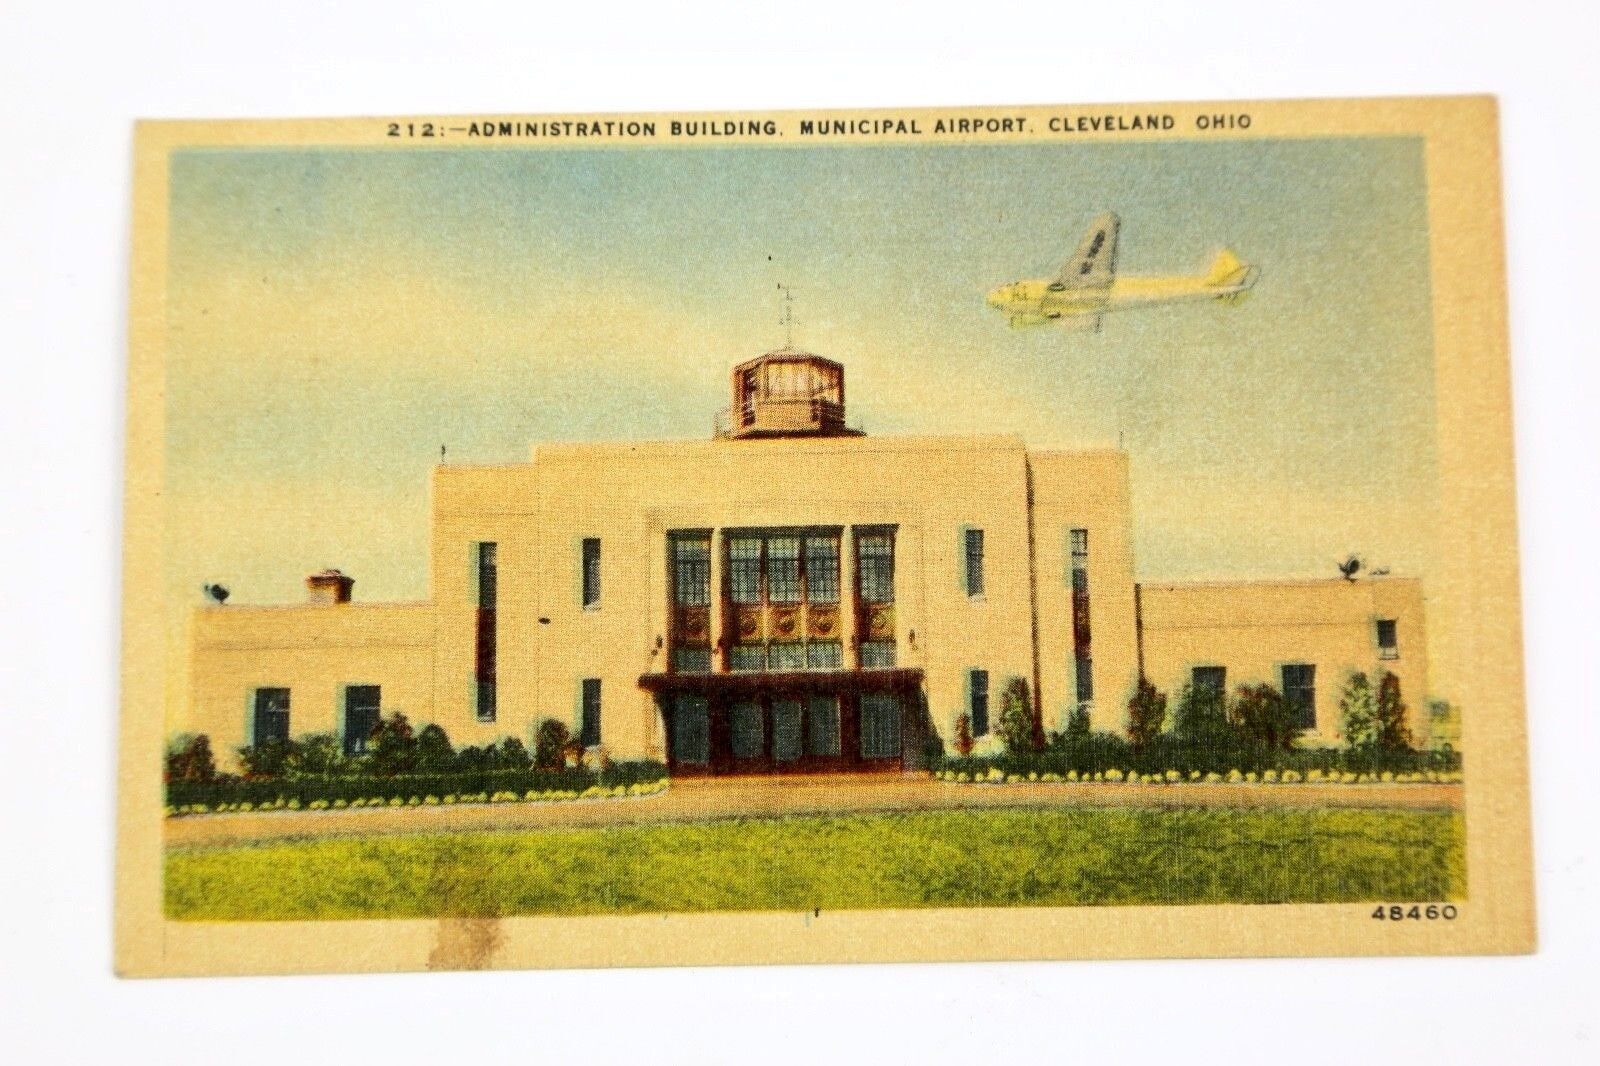 1946 Municipal Airport Cleveland, Ohio Airplane Aircraft Vintage Post Card old